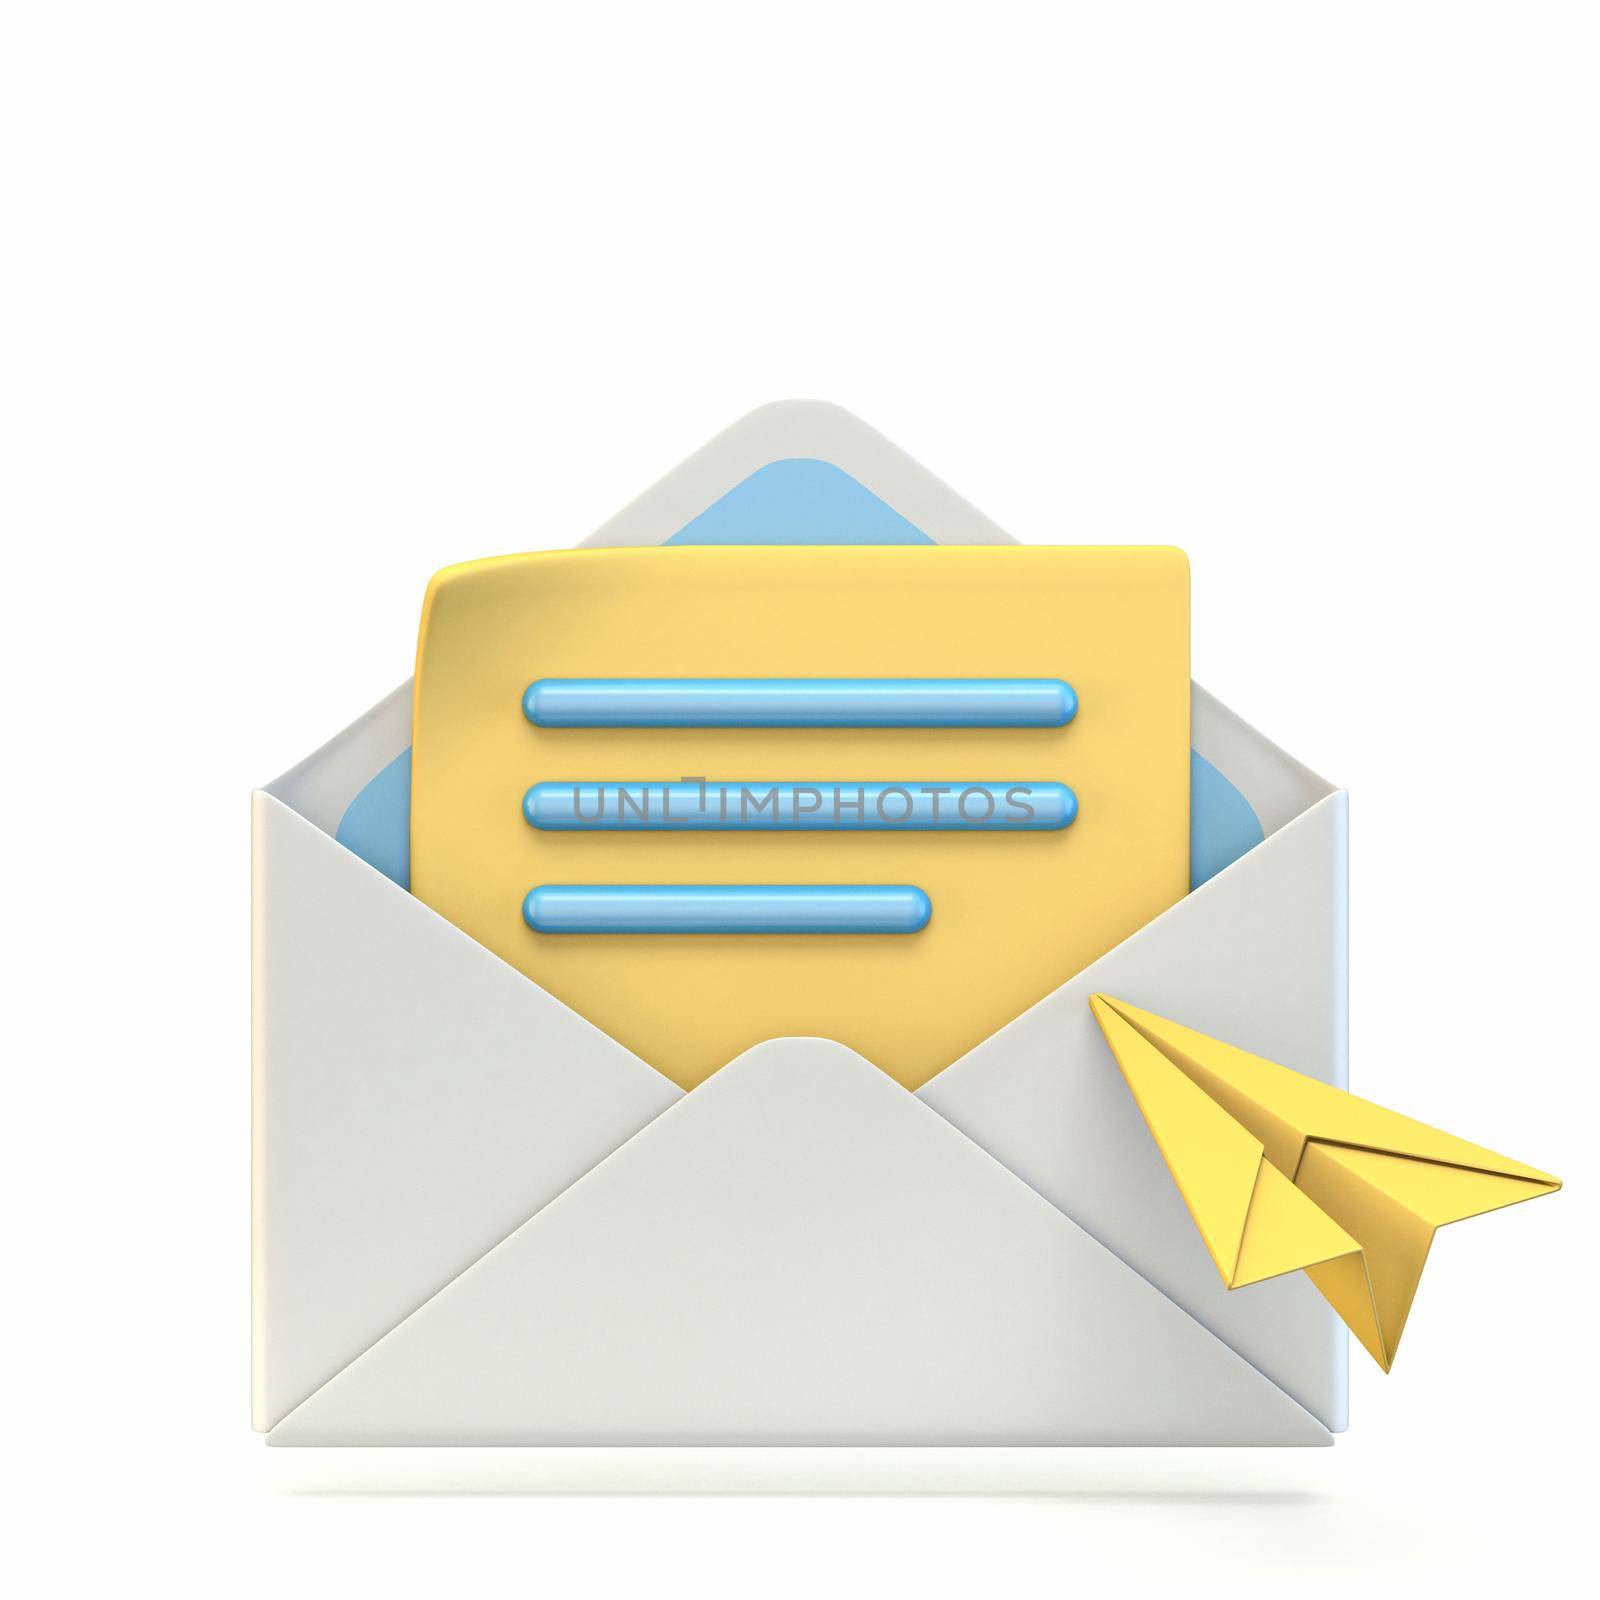 Mail icon with paper airplane 3D render illustration isolated on white background